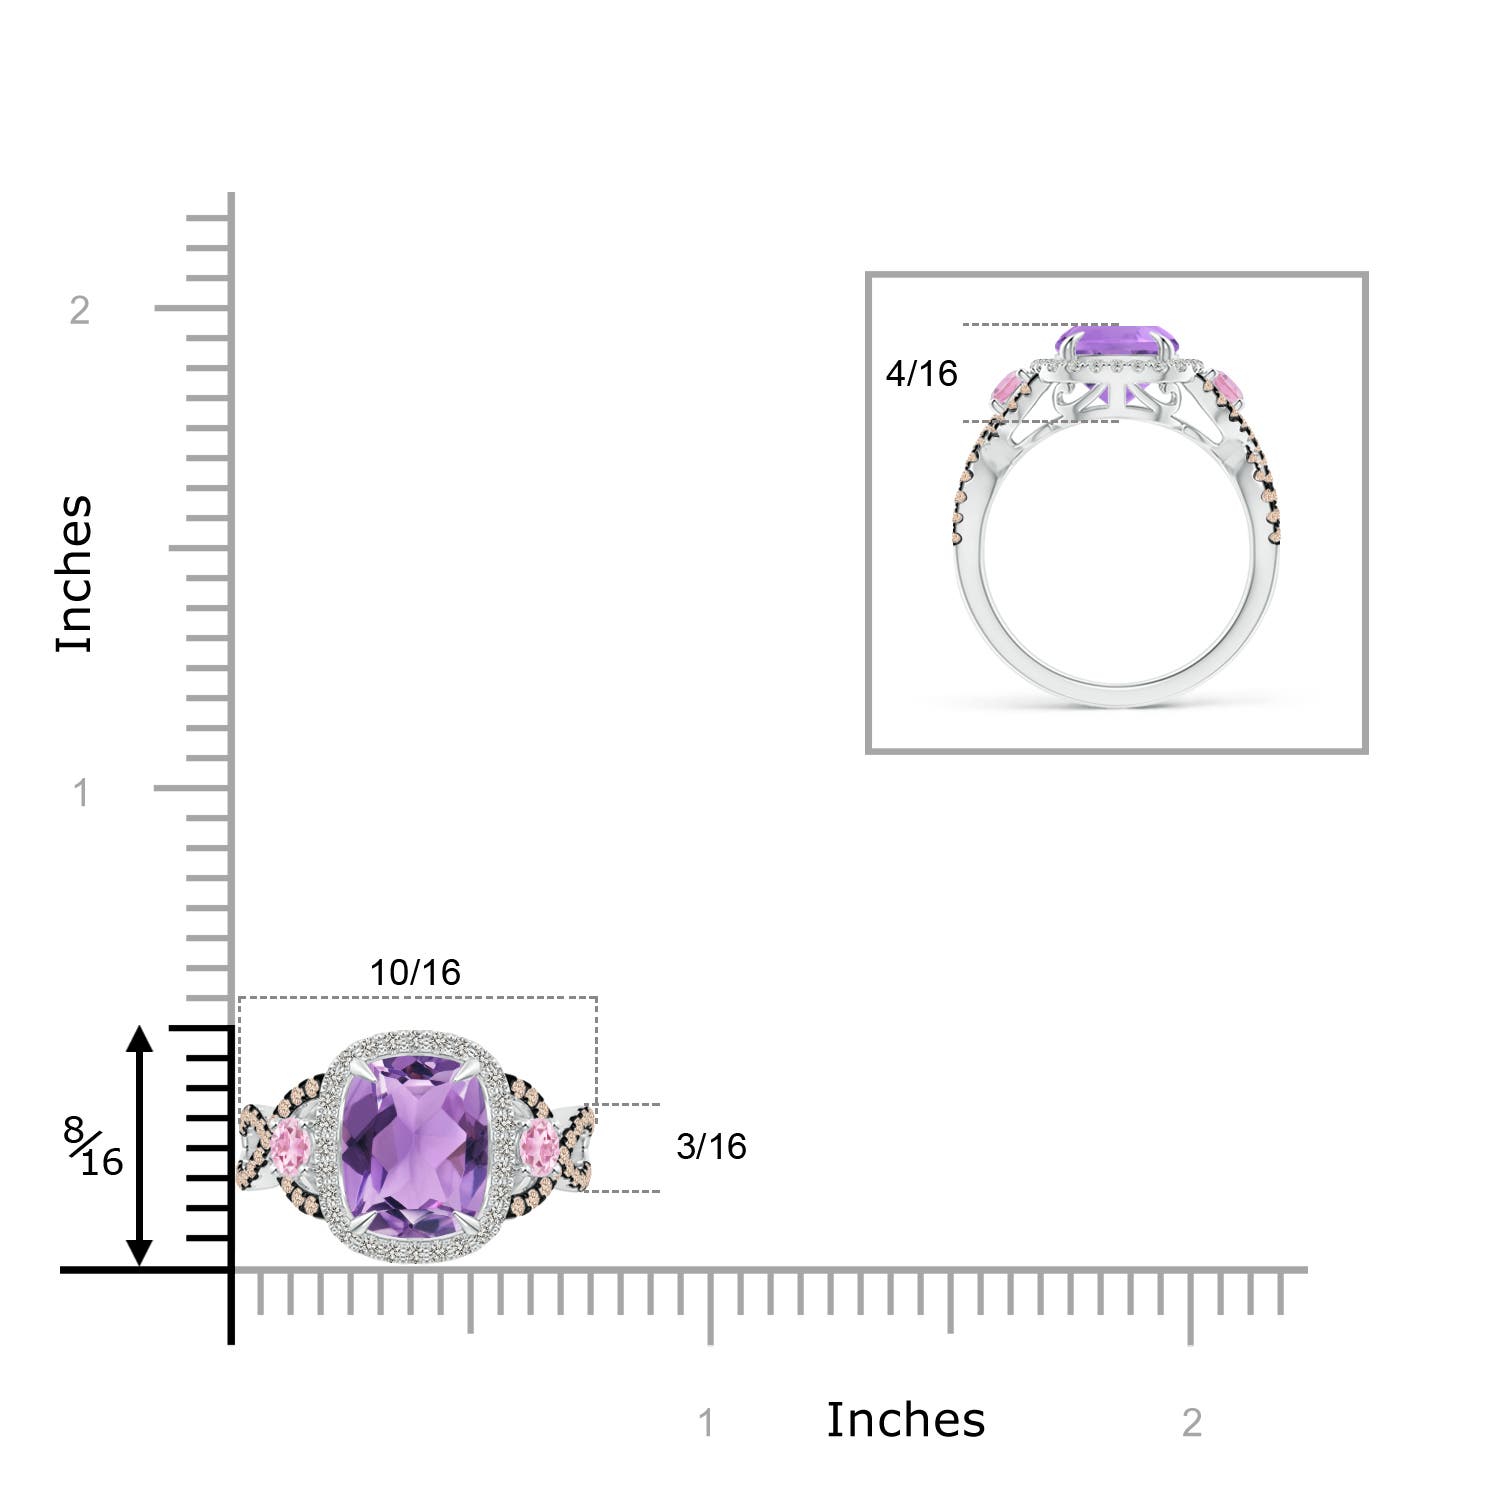 A - Amethyst / 2.59 CT / 14 KT White Gold